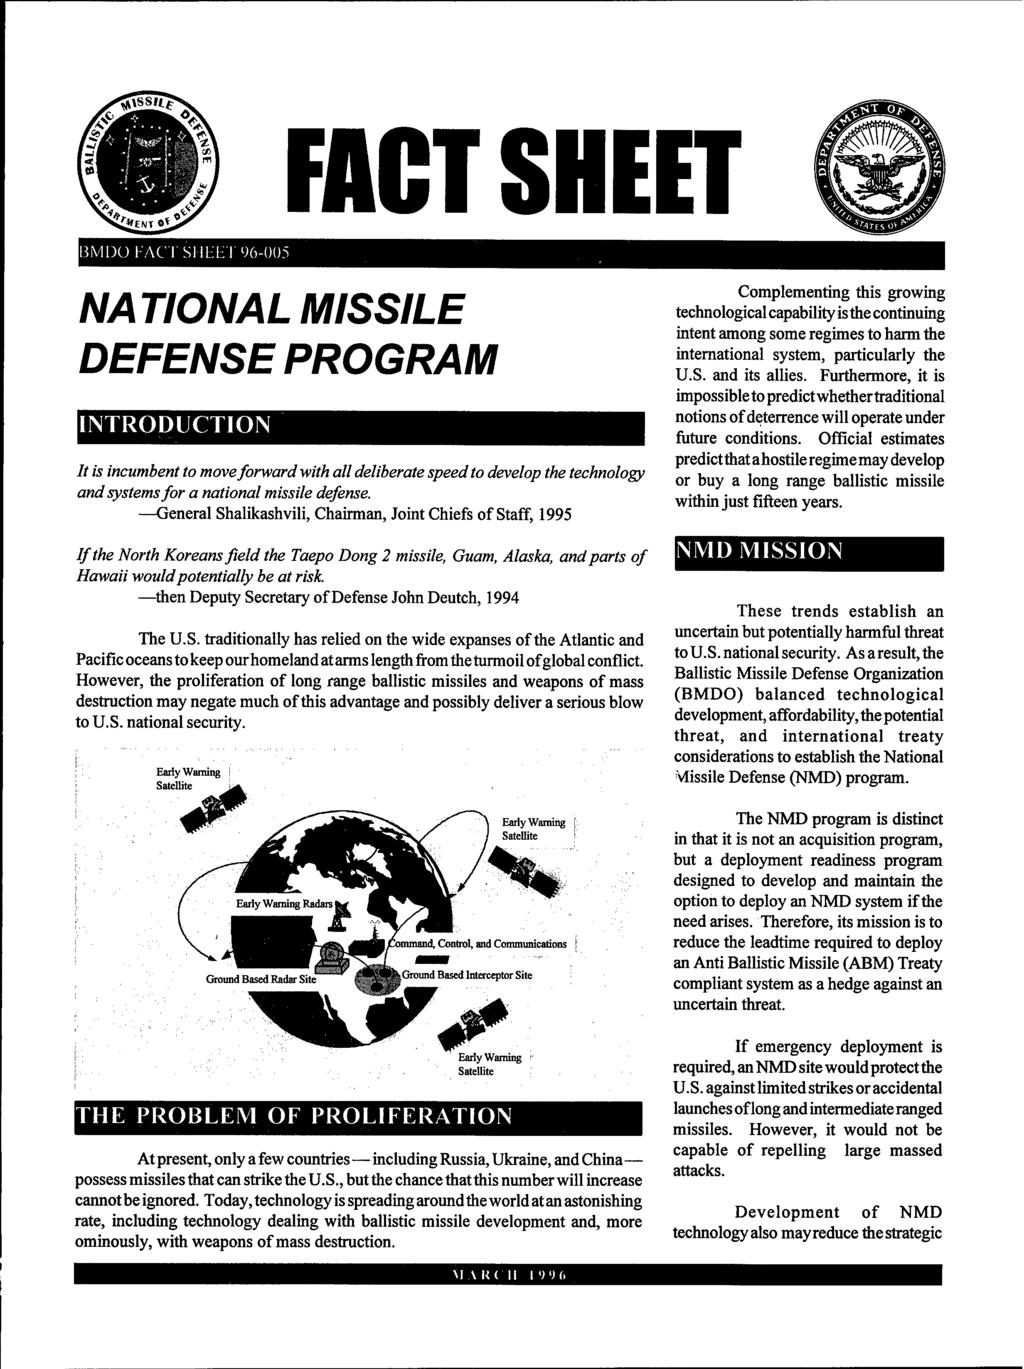 FACT SHEET IBM DO FAC 96-005 NATIONAL MISSILE DEFENSE PROGRAM INTRODUCTION It is incumbent to move forward with all deliberate speed to develop the technology and systems for a national missile